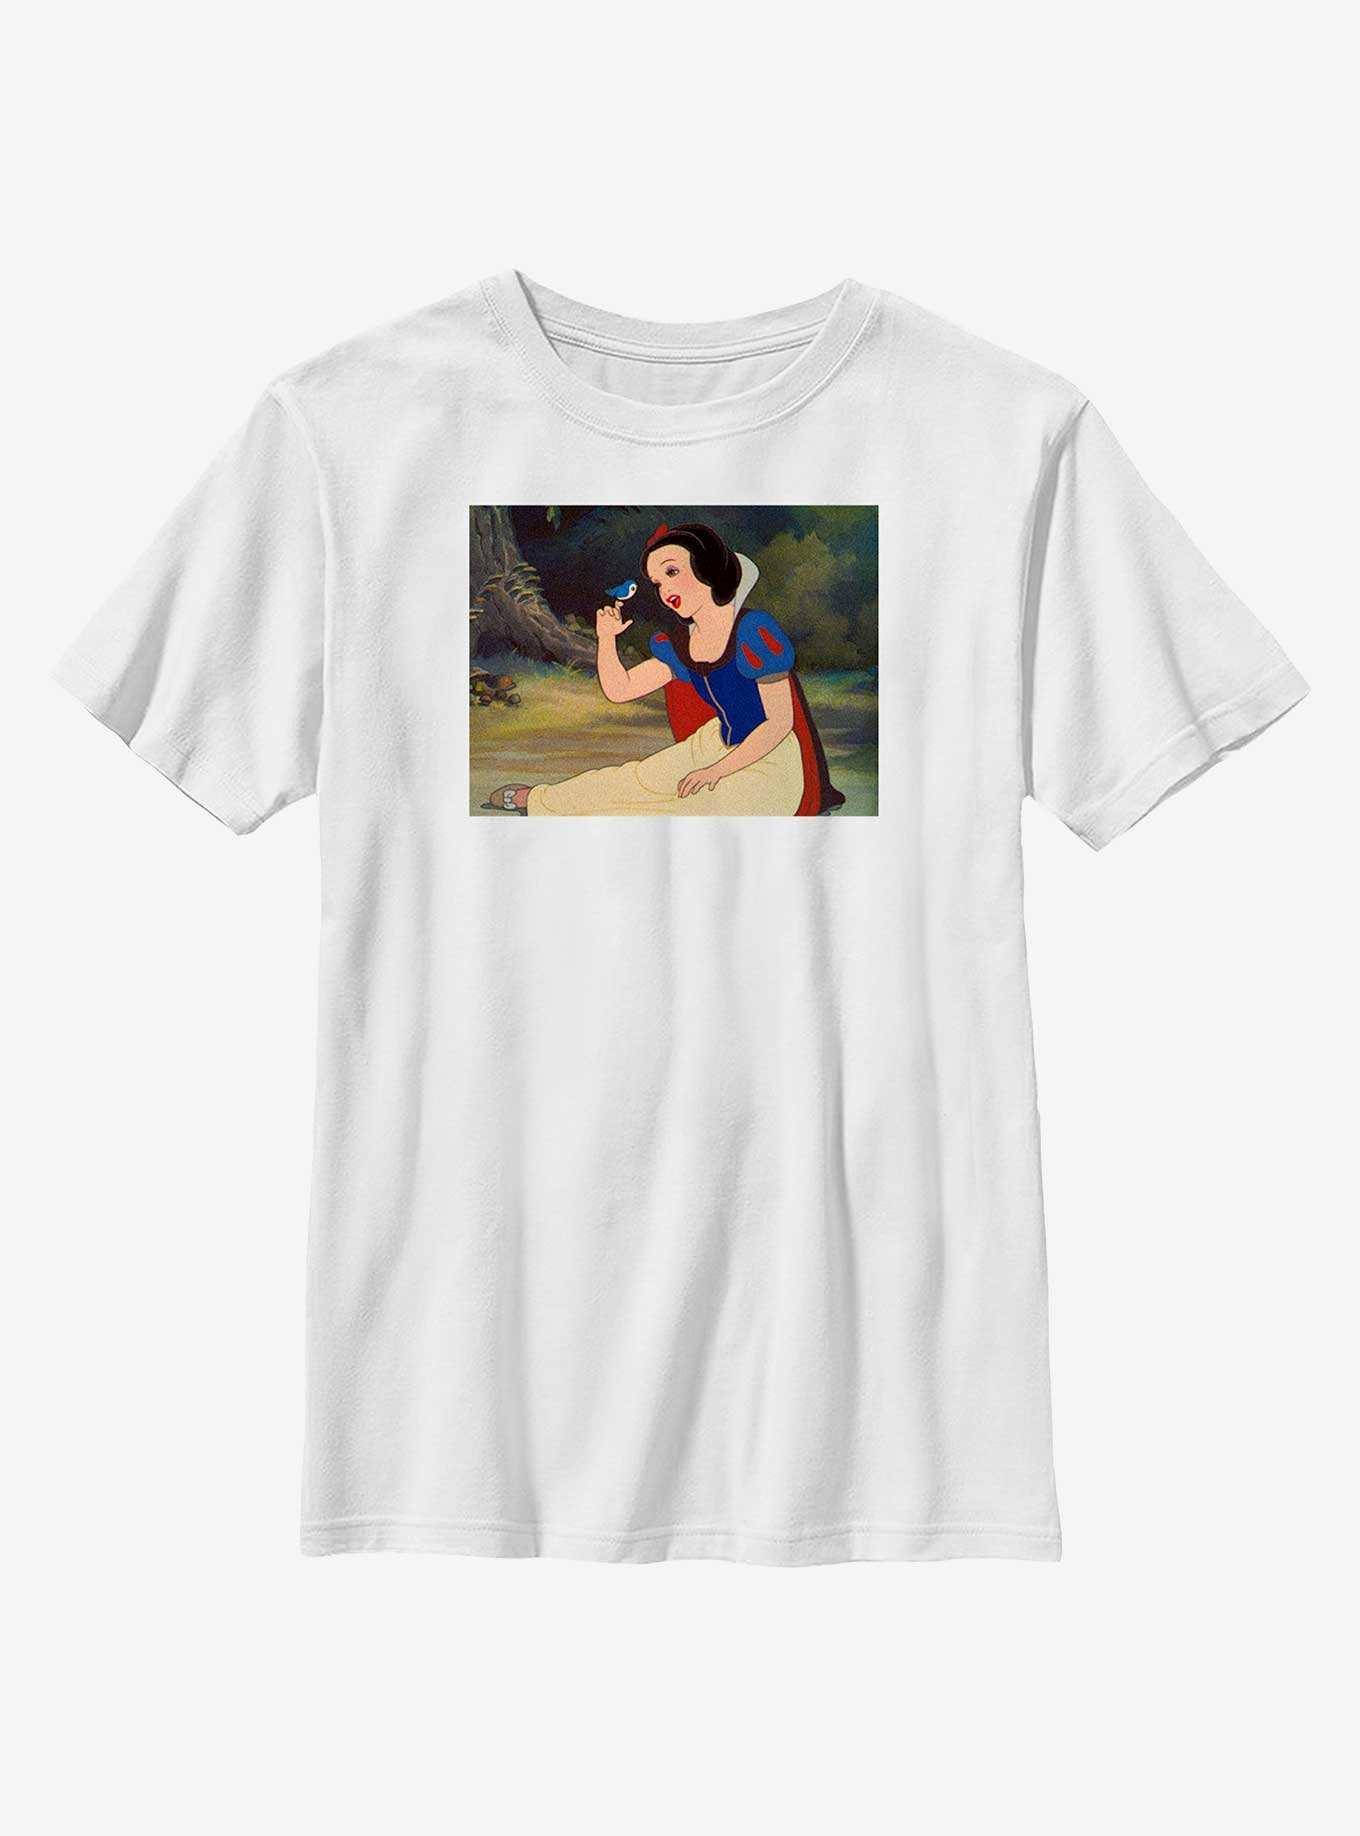 Disney Snow White And The Seven Dwarfs Singing Scene Youth T-Shirt, , hi-res